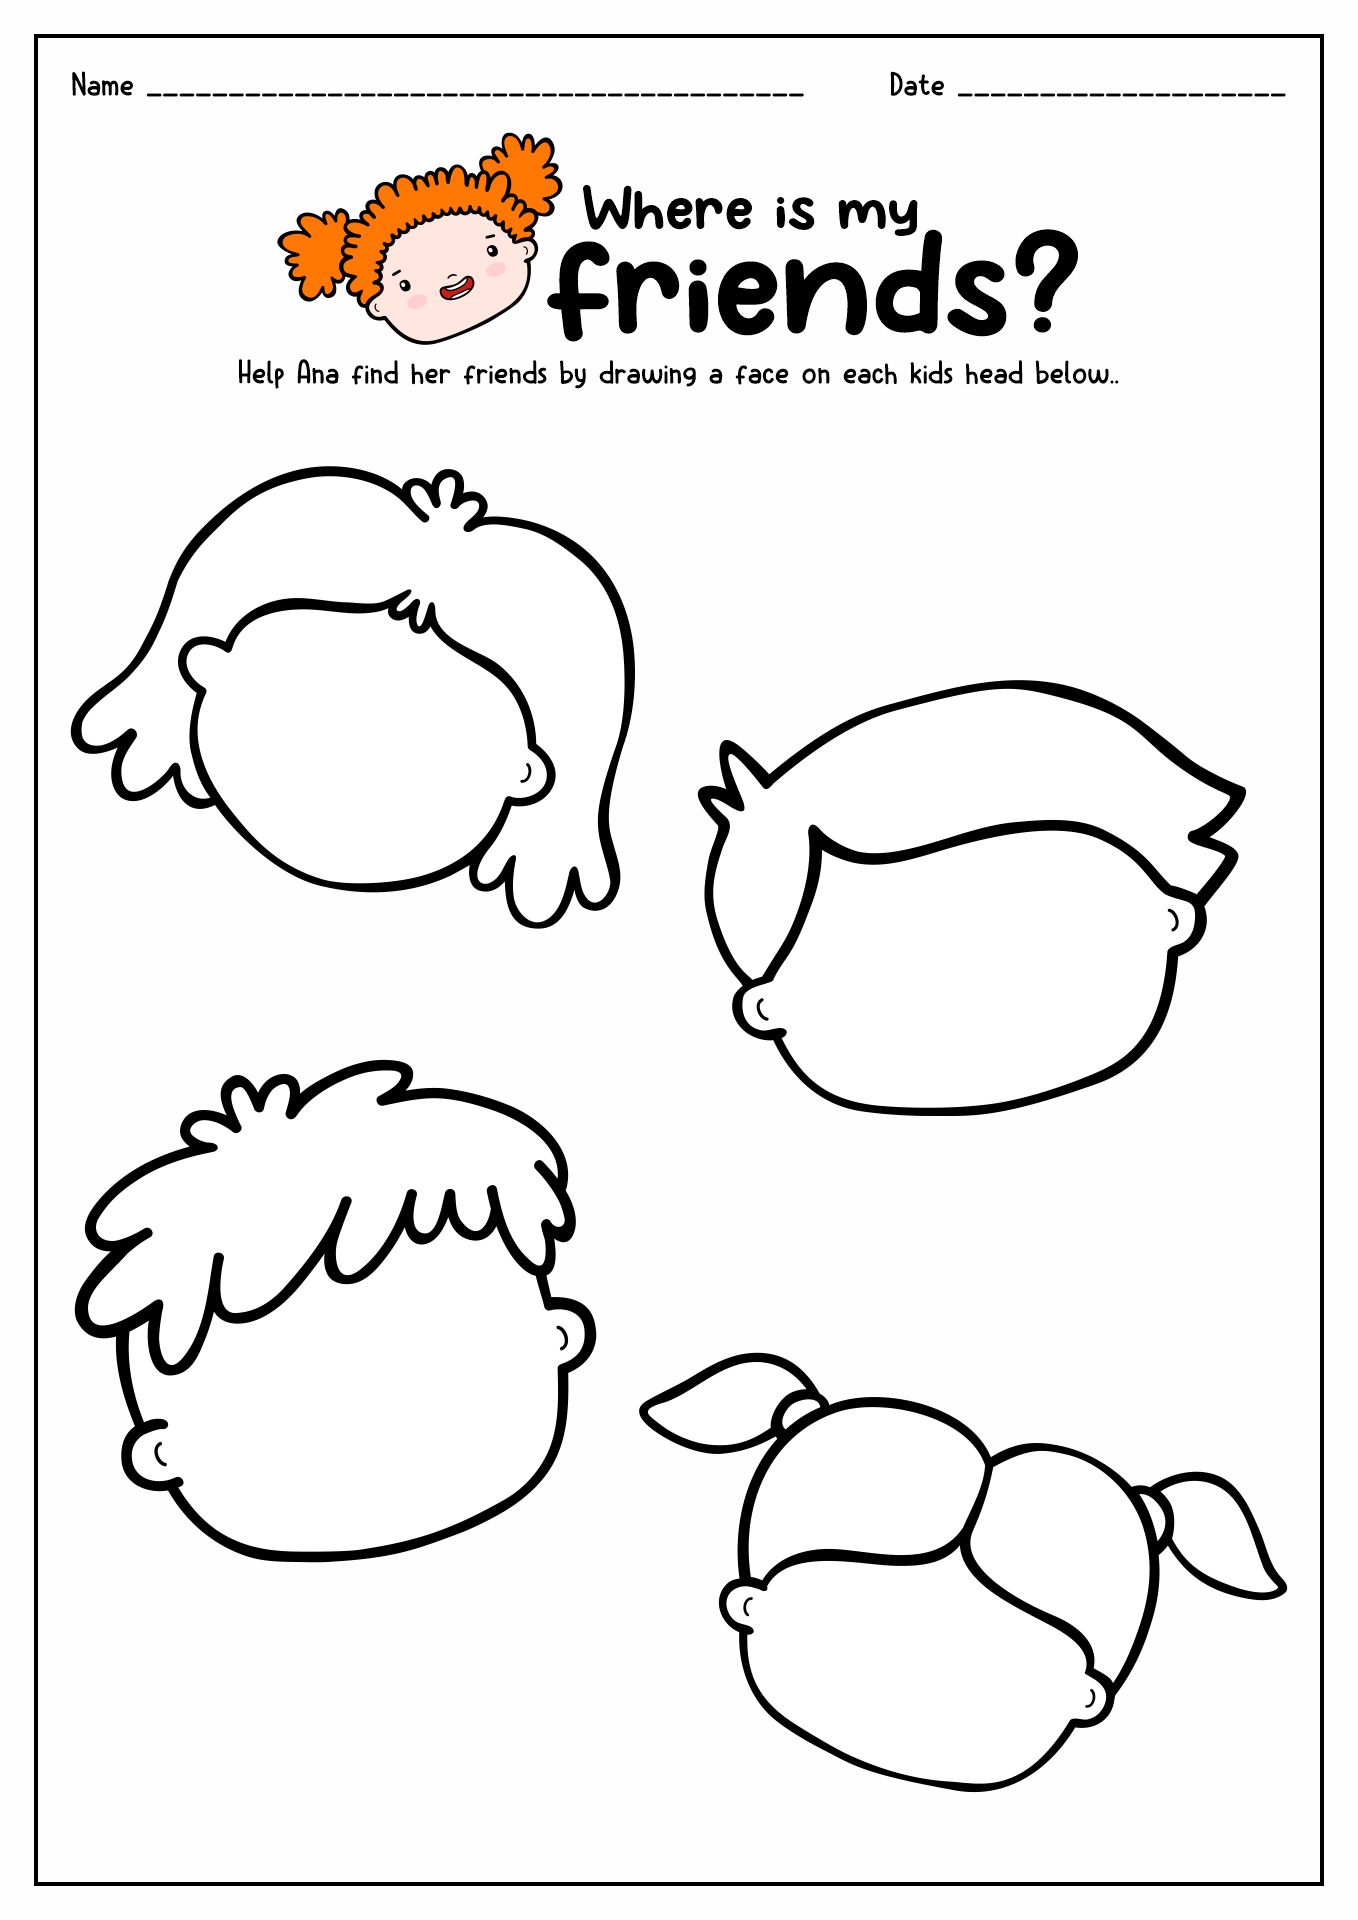 Make a Easy Kid Activity Printable Face Emotions Explore Image